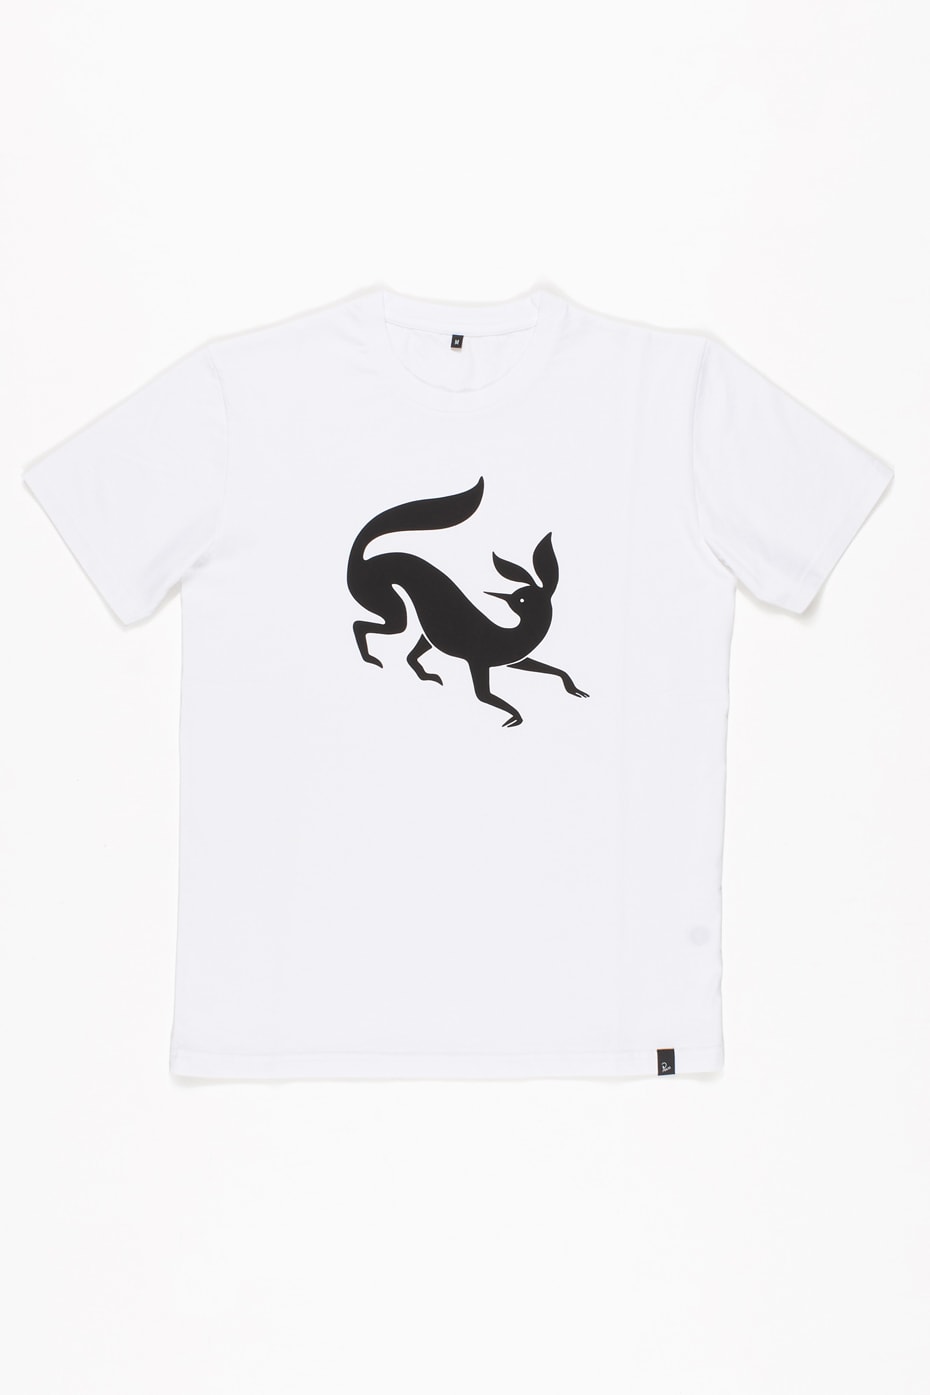 parra graphic tees apparel clothing bottle opener streetwear fashion style